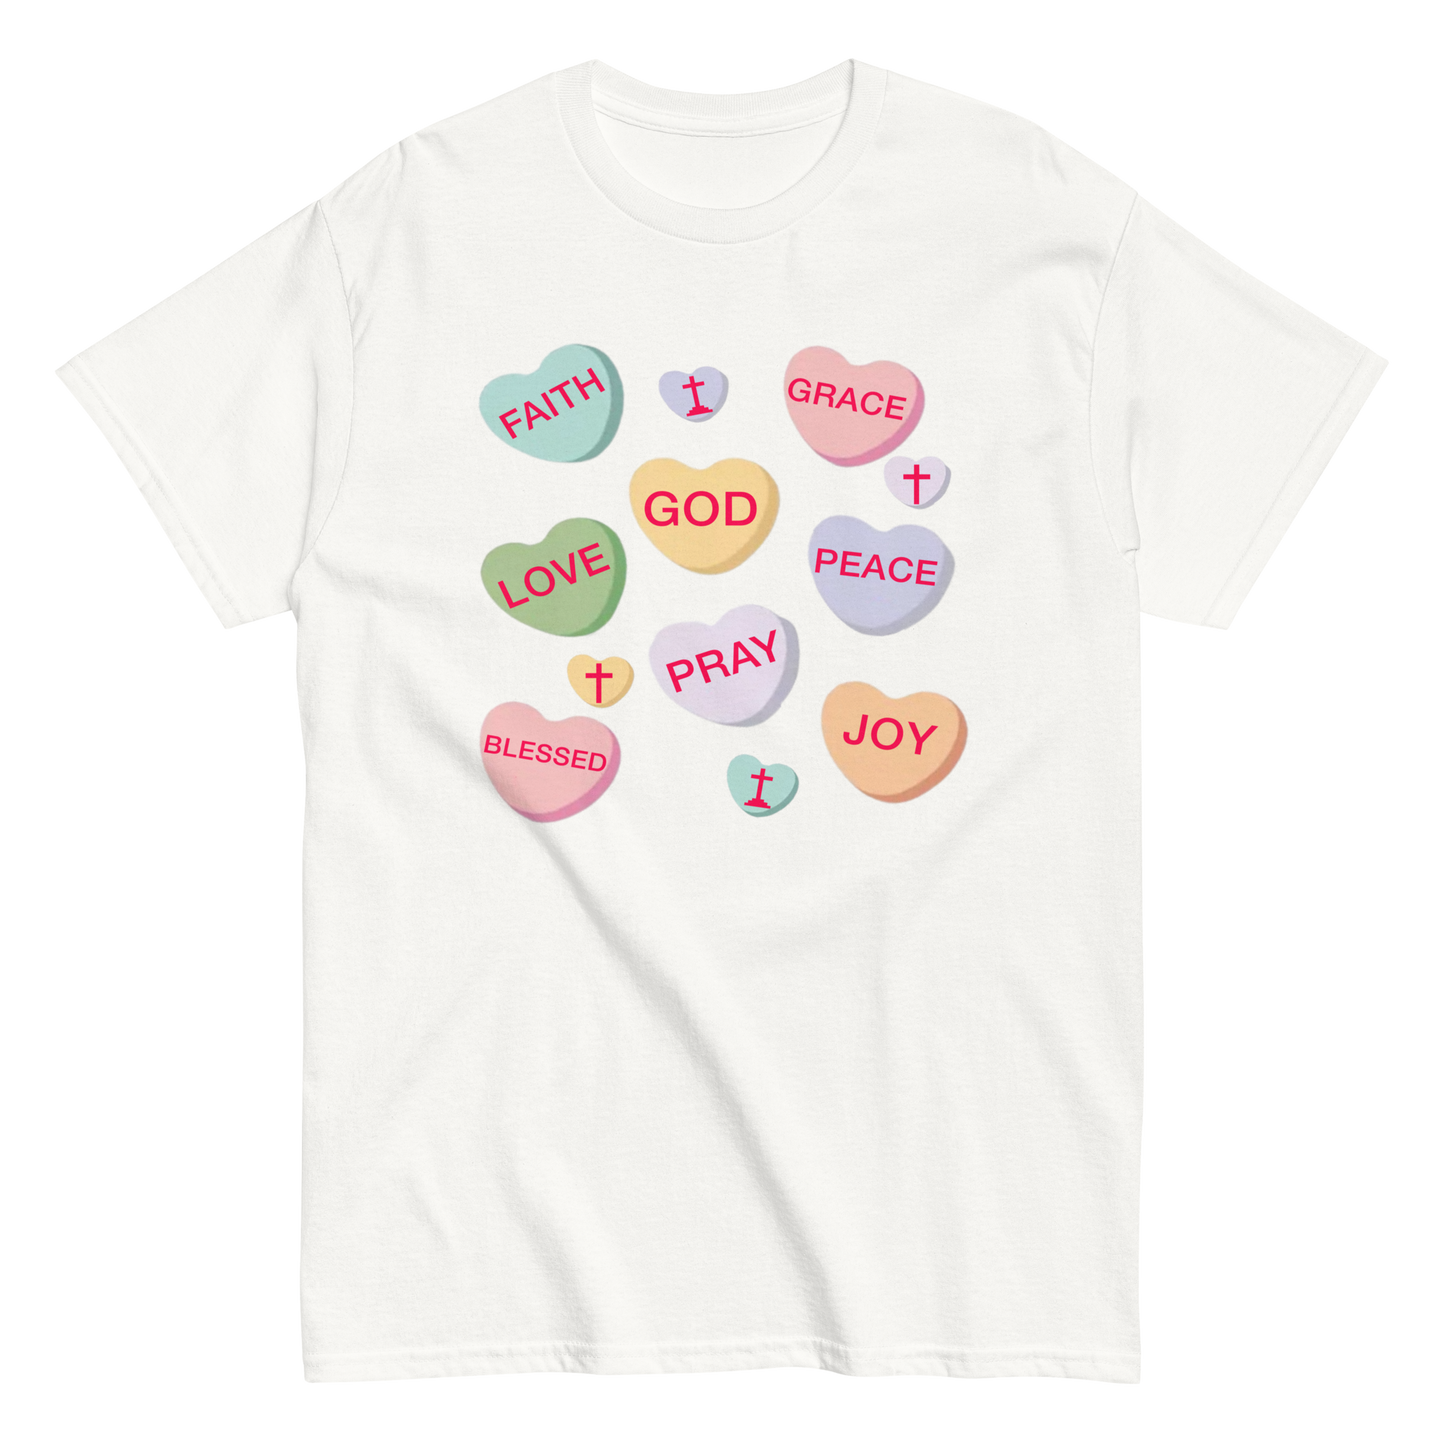 GOD Is My Sweetheart Candy Valentine's Day Shirt